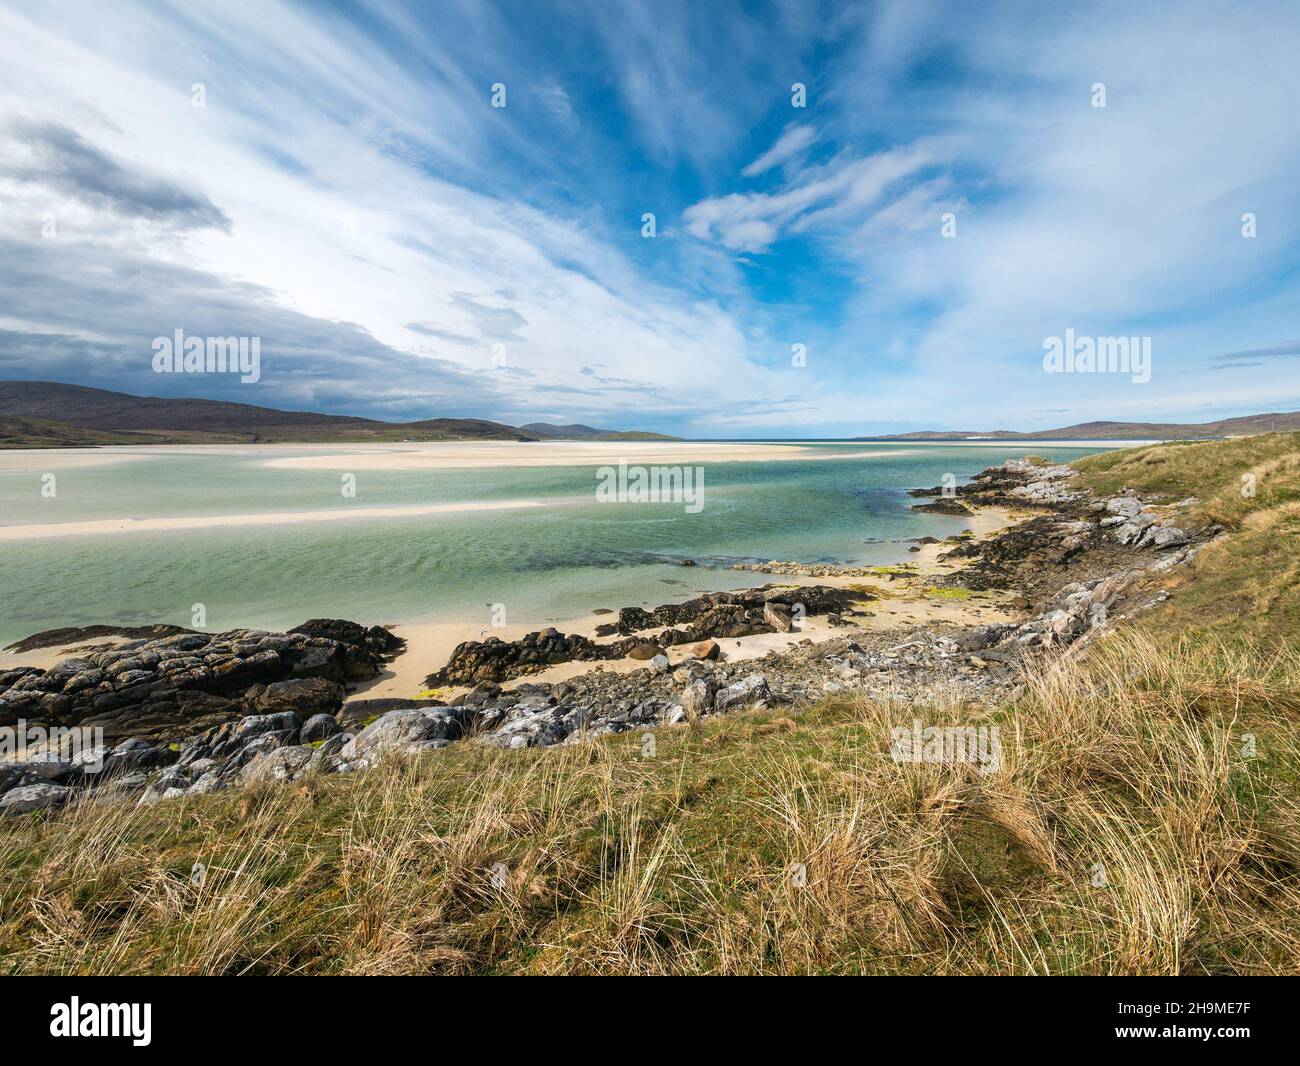 Dramatic blue sky over the beautiful Luskentyre beach (Traigh Losgaintir) on the remote Hebridean Isle of Harris in the Outer Hebrides, Scotland, UK Stock Photo